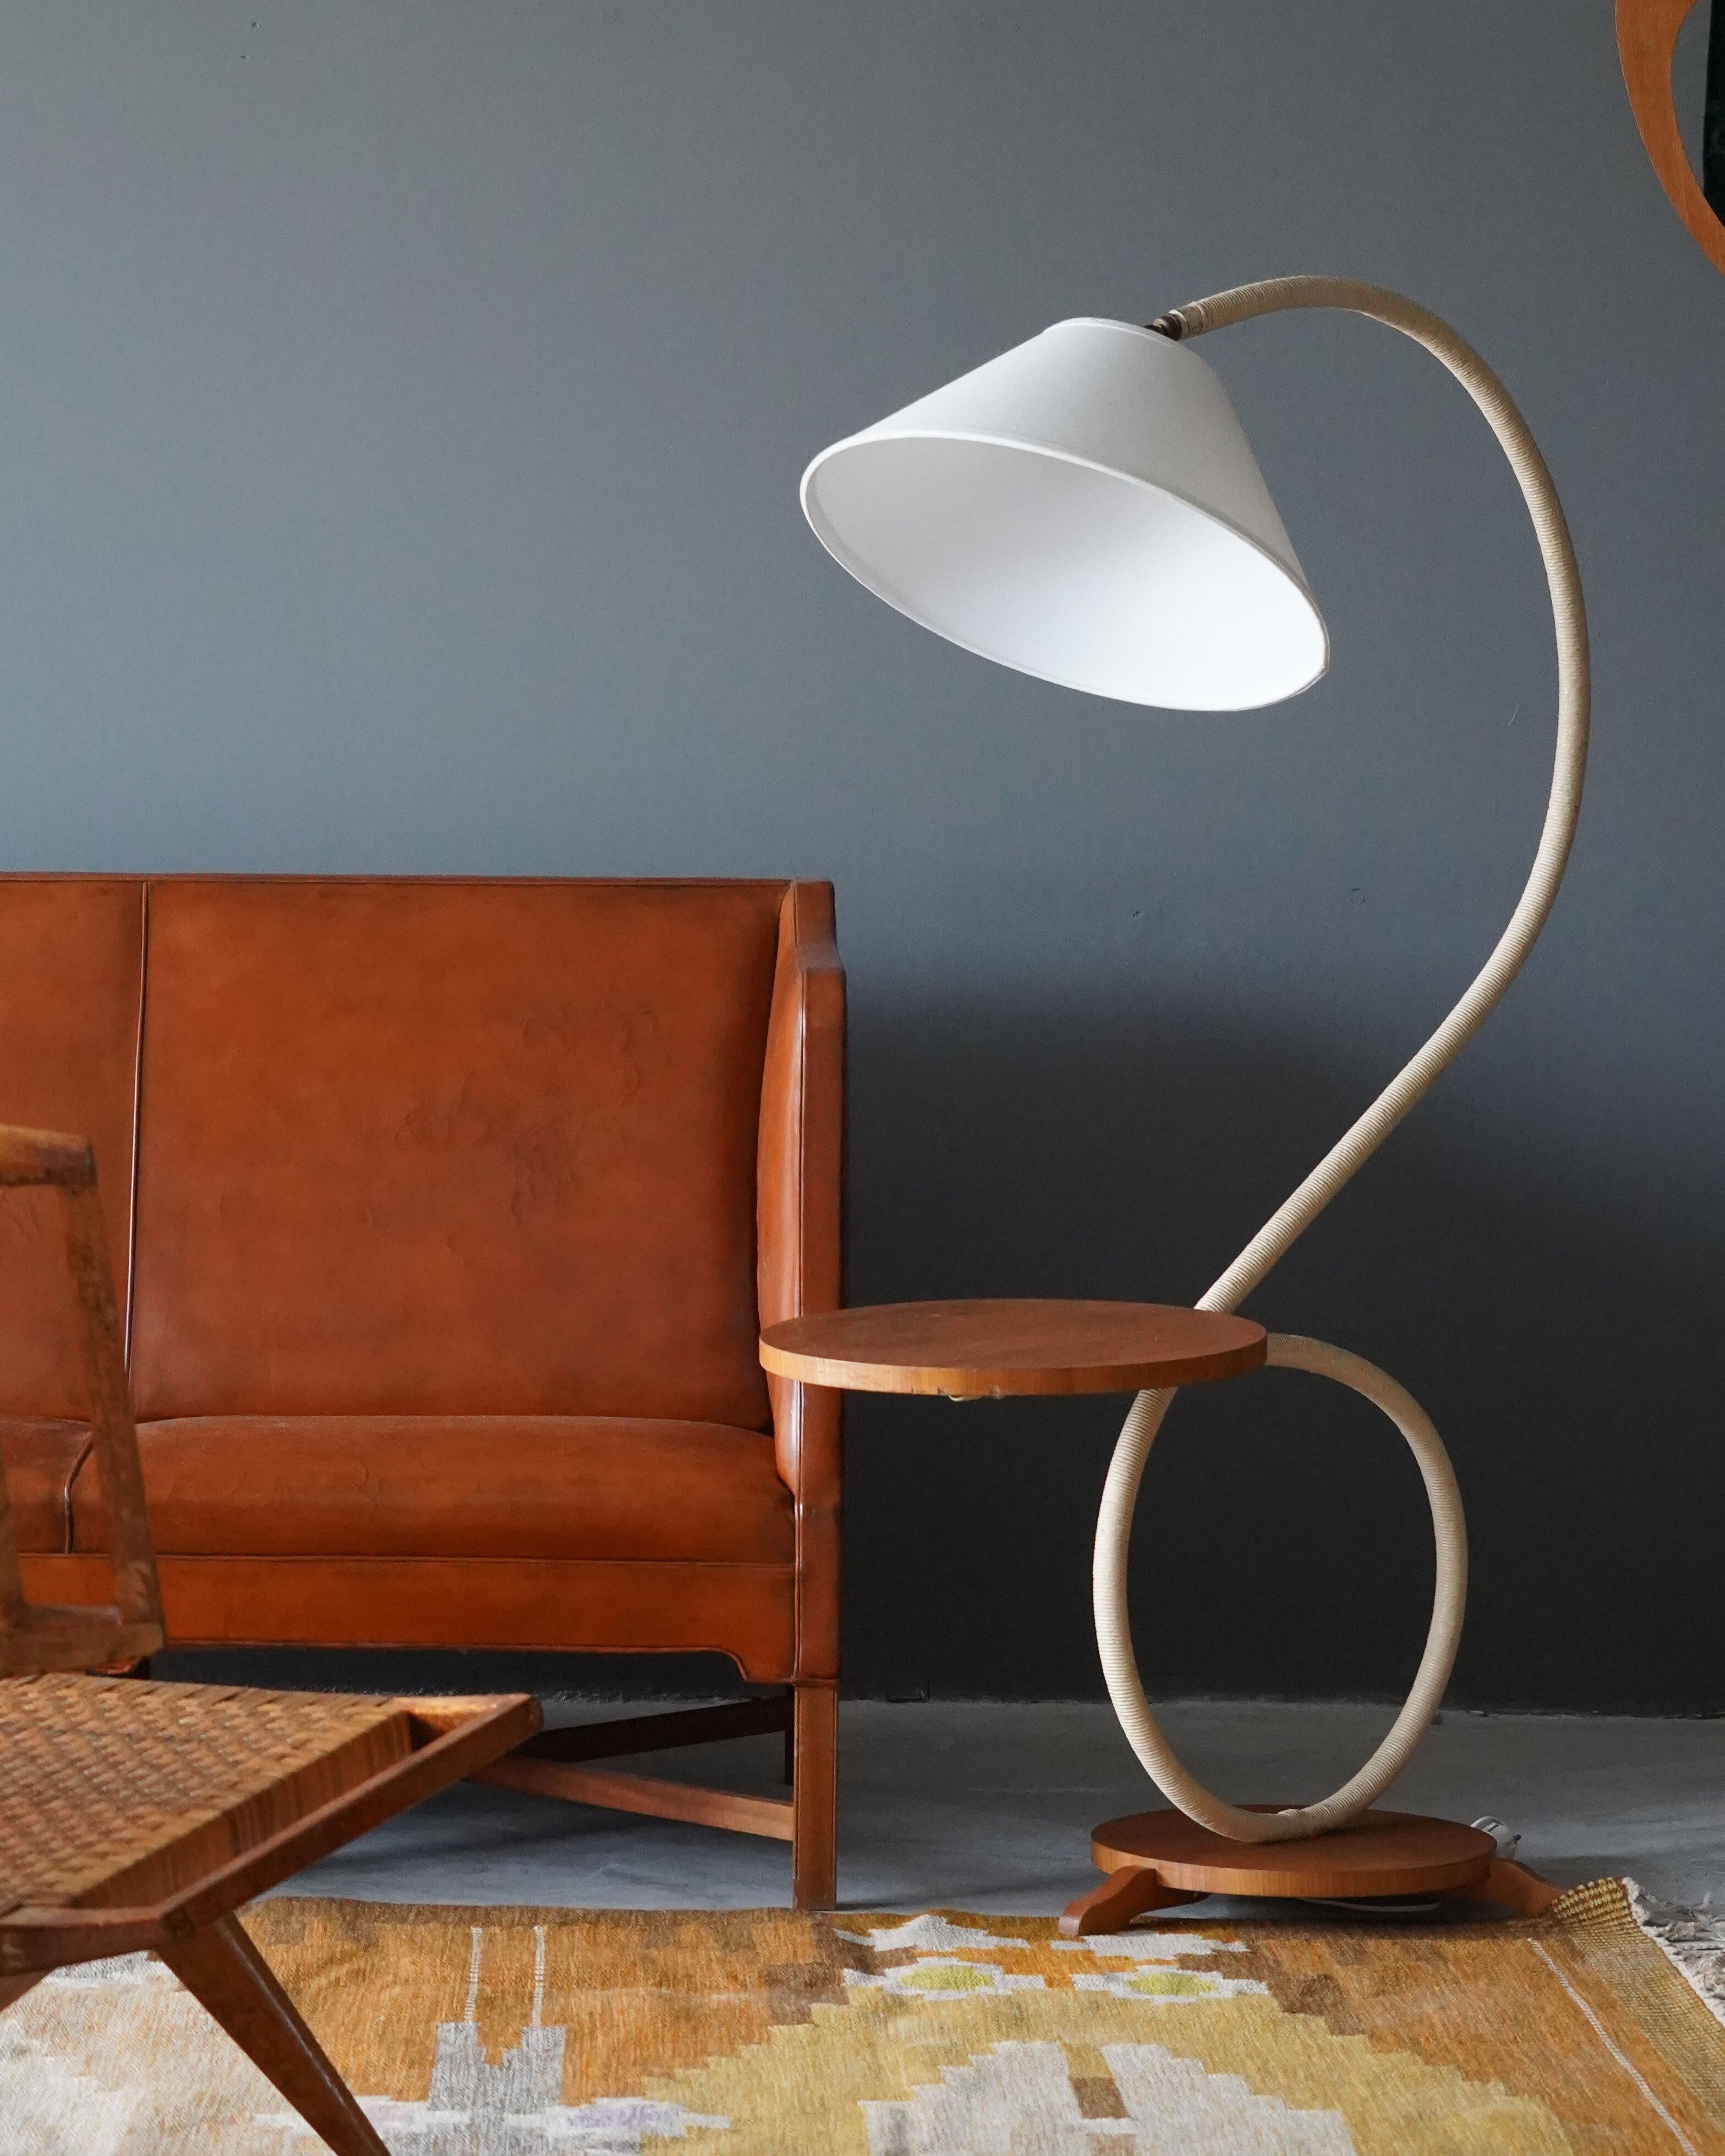 A sizable organic floor lamp. Designed by an unknown designer, Sweden, 1940s. Features an interesting mixture of cord wrapped stem on a solid wood base. Brass details. Original mounted side table. Brand new lampshade.

Other designers working in